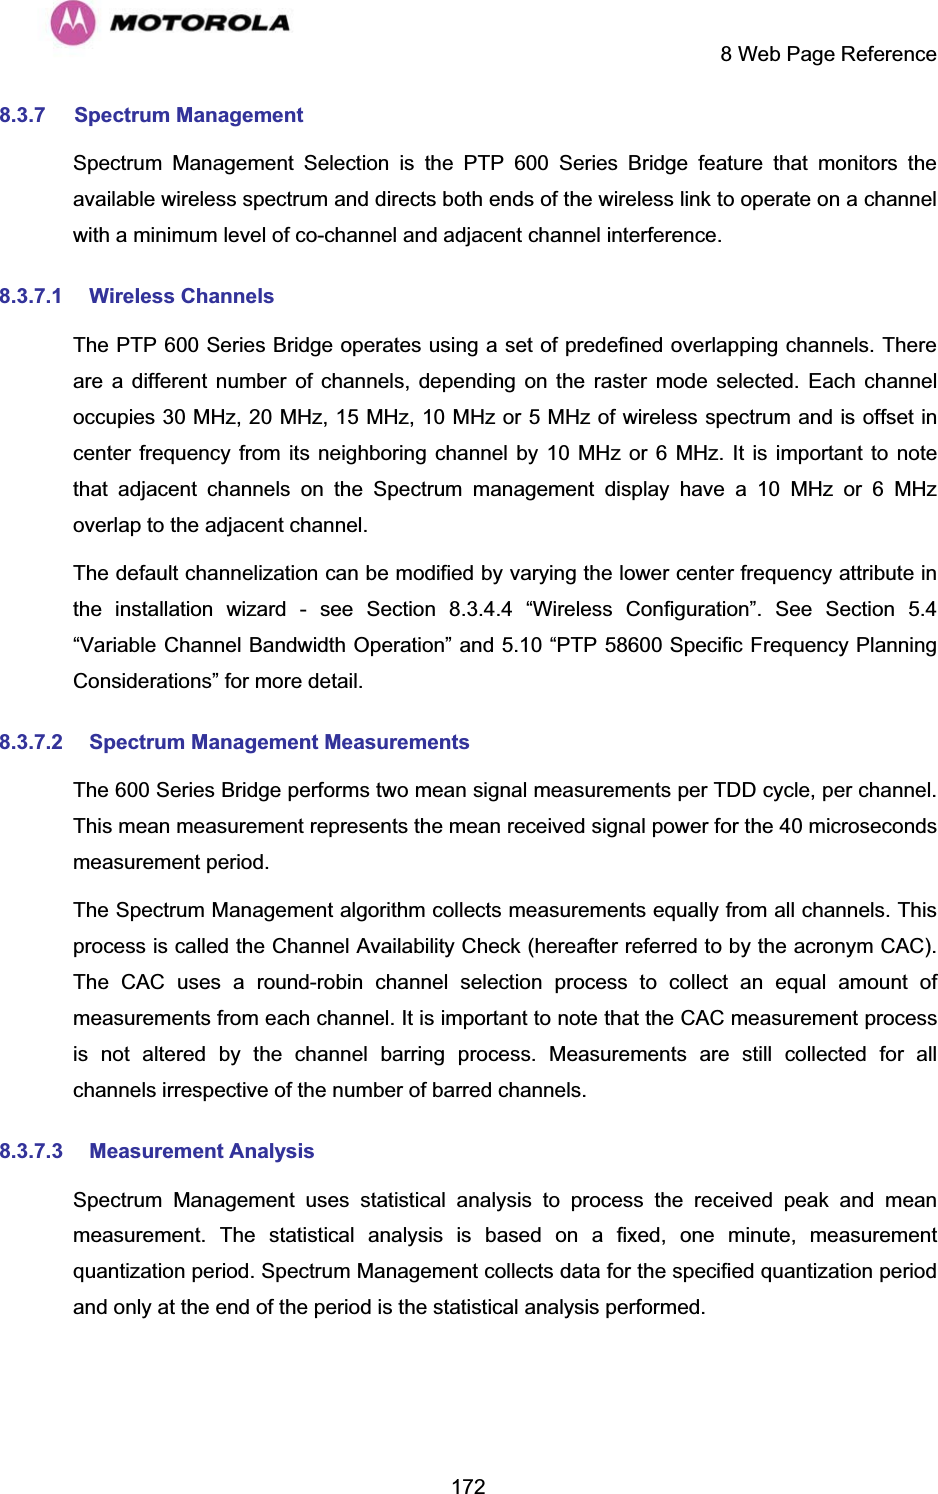     8 Web Page Reference  1728.3.7 Spectrum Management  Spectrum  Management Selection is the PTP 600 Series Bridge feature that monitors the available wireless spectrum and directs both ends of the wireless link to operate on a channel with a minimum level of co-channel and adjacent channel interference. 8.3.7.1 Wireless Channels The PTP 600 Series Bridge operates using a set of predefined overlapping channels. There are a different number of channels, depending on the raster mode selected. Each channel occupies 30 MHz, 20 MHz, 15 MHz, 10 MHz or 5 MHz of wireless spectrum and is offset in center frequency from its neighboring channel by 10 MHz or 6 MHz. It is important to note that adjacent channels on the Spectrum management display have a 10 MHz or 6 MHz overlap to the adjacent channel. The default channelization can be modified by varying the lower center frequency attribute in the installation wizard - see Section 8.3.4.4 “Wireless Configuration”. See Section 5.4 “Variable Channel Bandwidth Operation” and 5.10 “PTP 58600 Specific Frequency Planning Considerations” for more detail. 8.3.7.2 Spectrum Management Measurements The 600 Series Bridge performs two mean signal measurements per TDD cycle, per channel. This mean measurement represents the mean received signal power for the 40 microseconds measurement period. The Spectrum Management algorithm collects measurements equally from all channels. This process is called the Channel Availability Check (hereafter referred to by the acronym CAC). The CAC uses a round-robin channel selection process to collect an equal amount of measurements from each channel. It is important to note that the CAC measurement process is not altered by the channel barring process. Measurements are still collected for all channels irrespective of the number of barred channels. 8.3.7.3 Measurement Analysis Spectrum Management uses statistical analysis to process the received peak and mean measurement. The statistical analysis is based on a fixed, one minute, measurement quantization period. Spectrum Management collects data for the specified quantization period and only at the end of the period is the statistical analysis performed. 